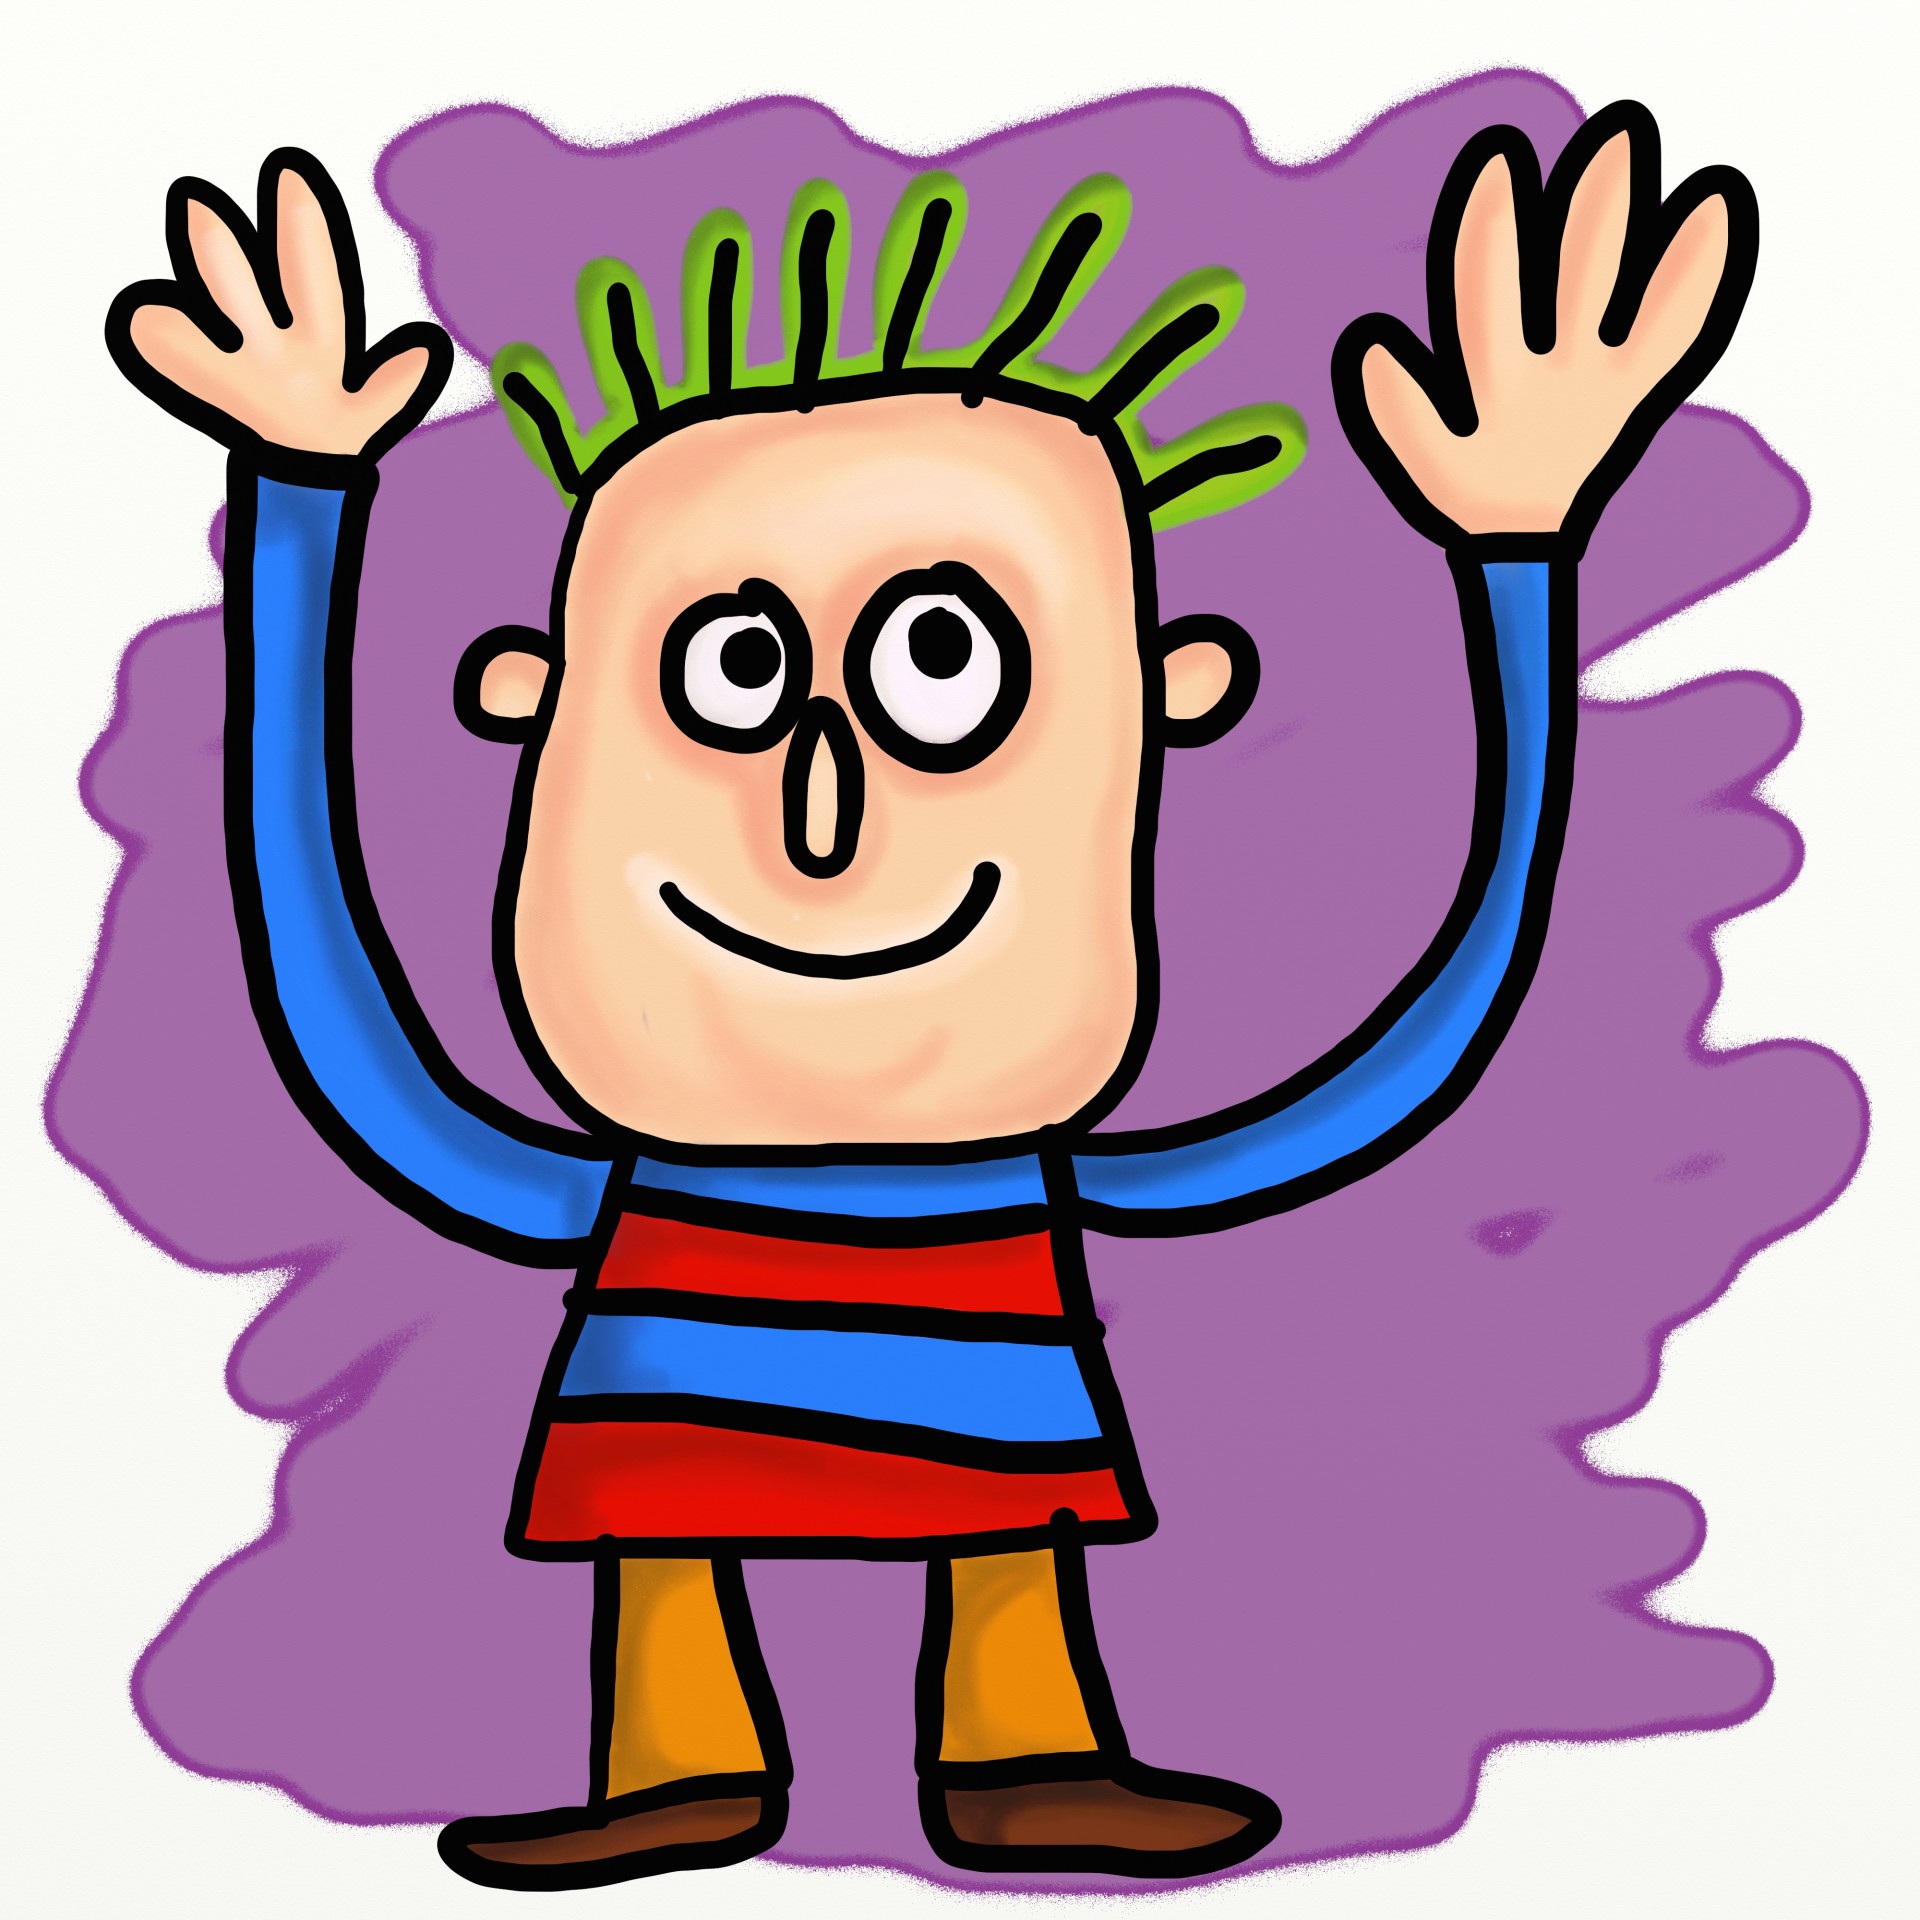 Clipart,clip art,illustration,graphic,cartoon - free image from 